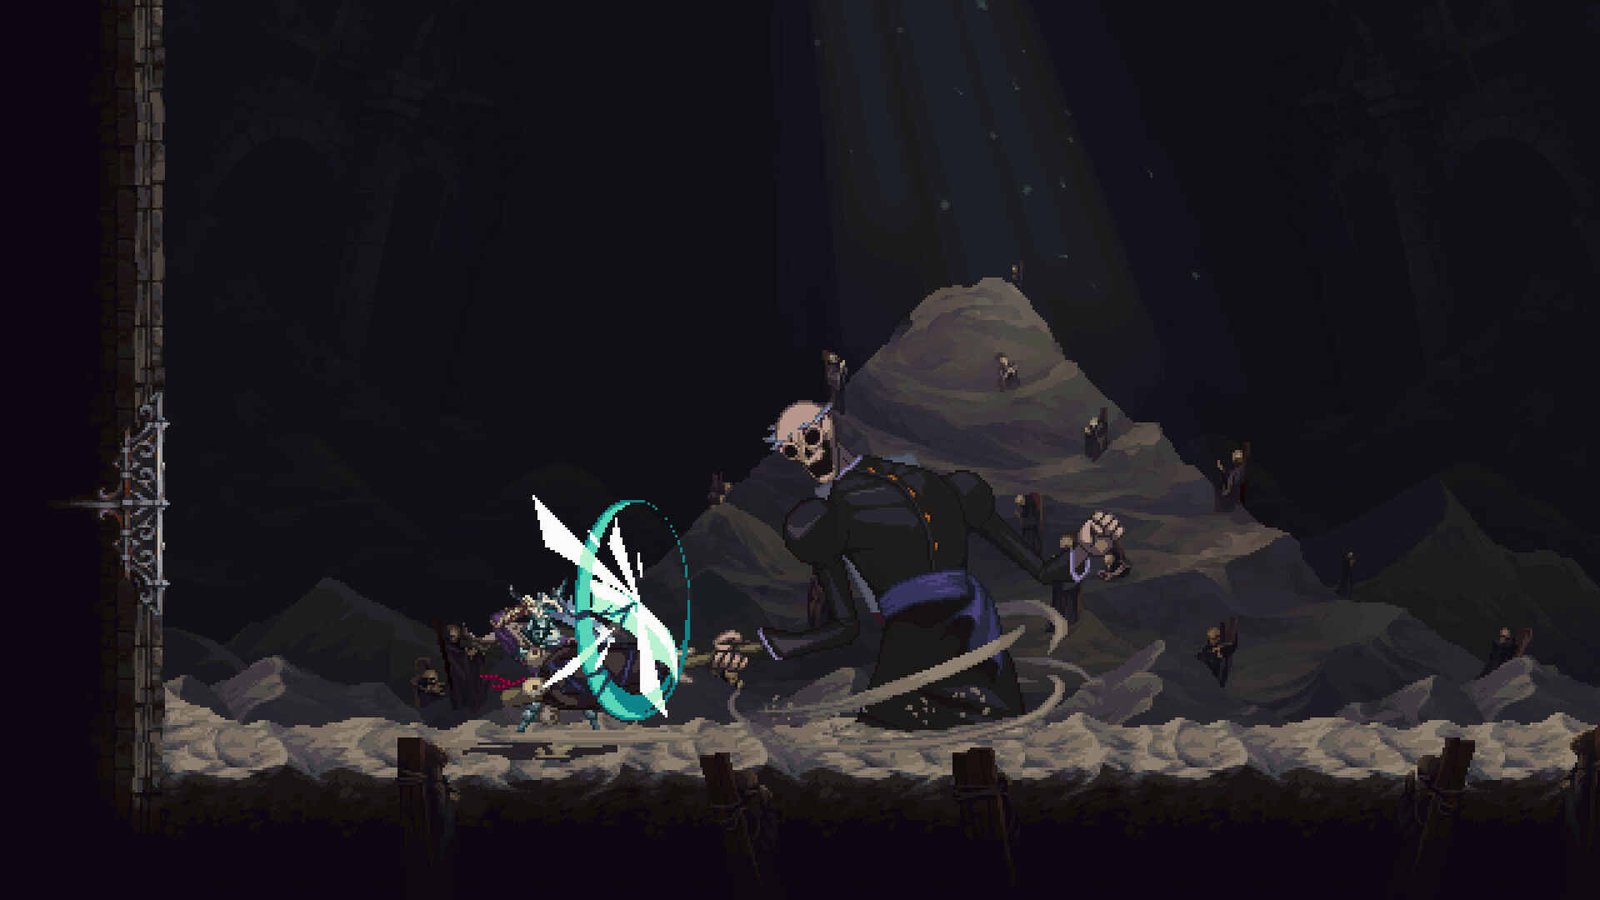 Blasphemous 2 Unable to Move After Cutscene Issue: Is there any fix yet